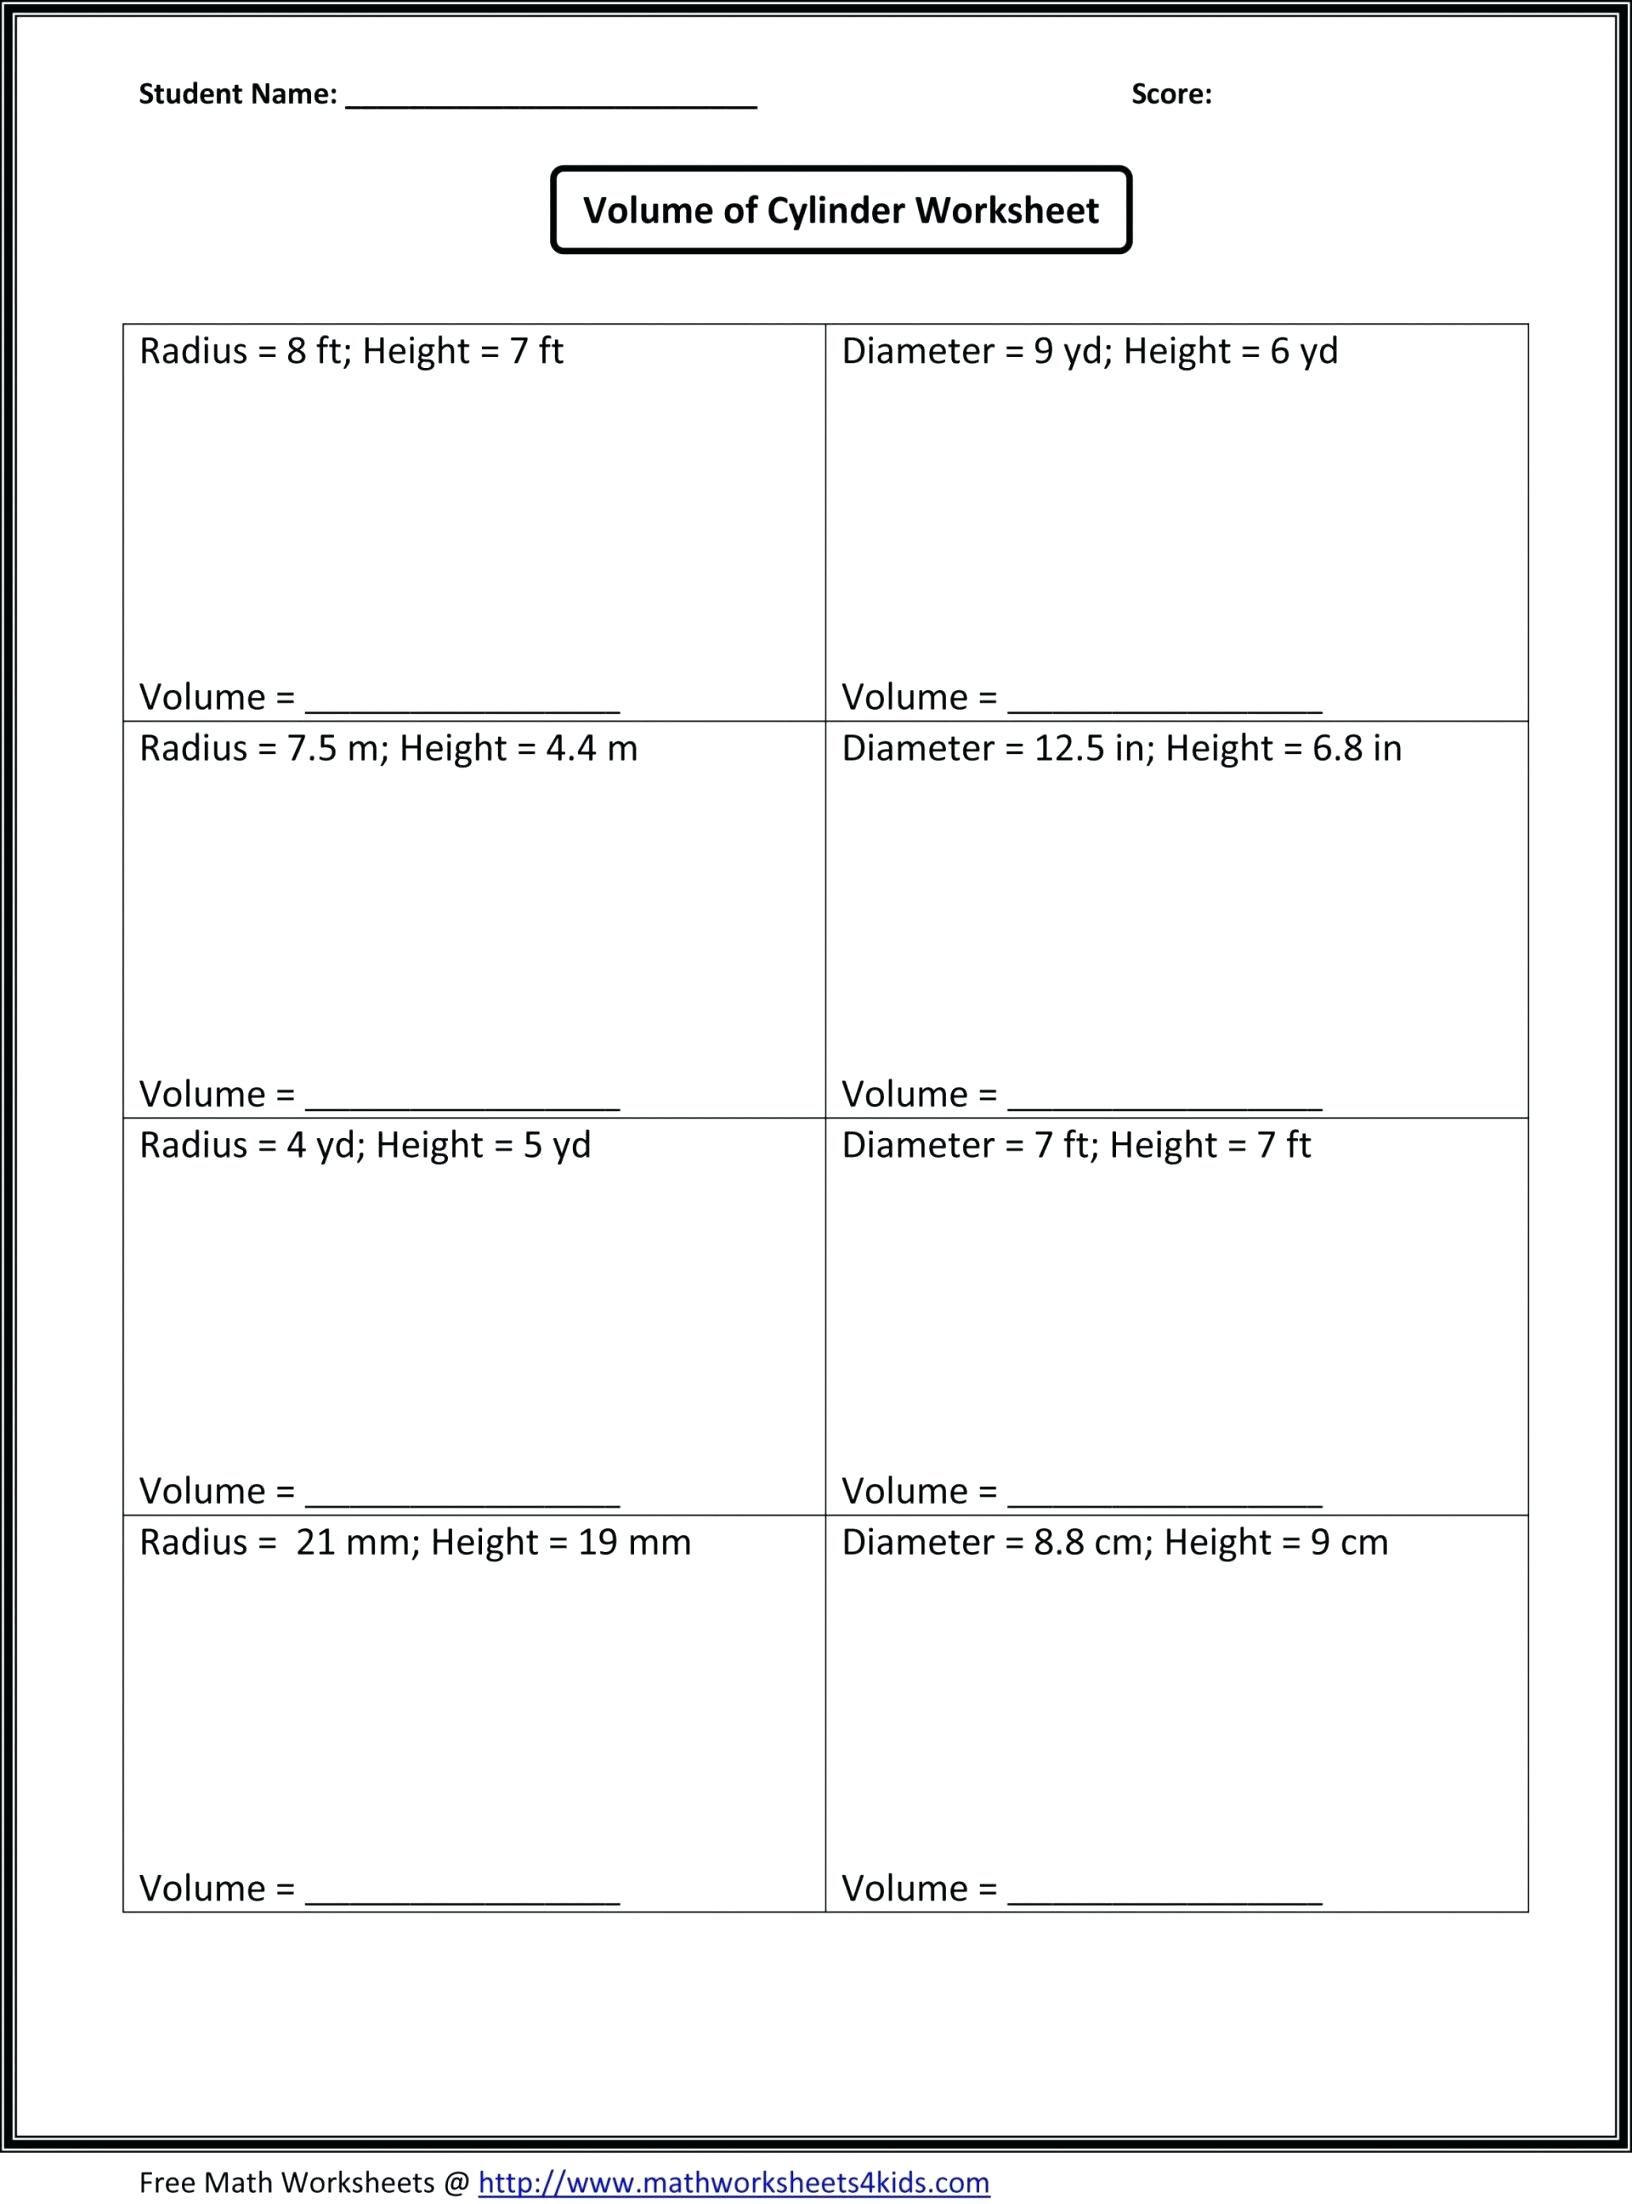 8Th Grade Math Problems With Answers Grade Math Worksheet Worksheets | Free Printable Math Worksheets For 7Th 8Th Graders